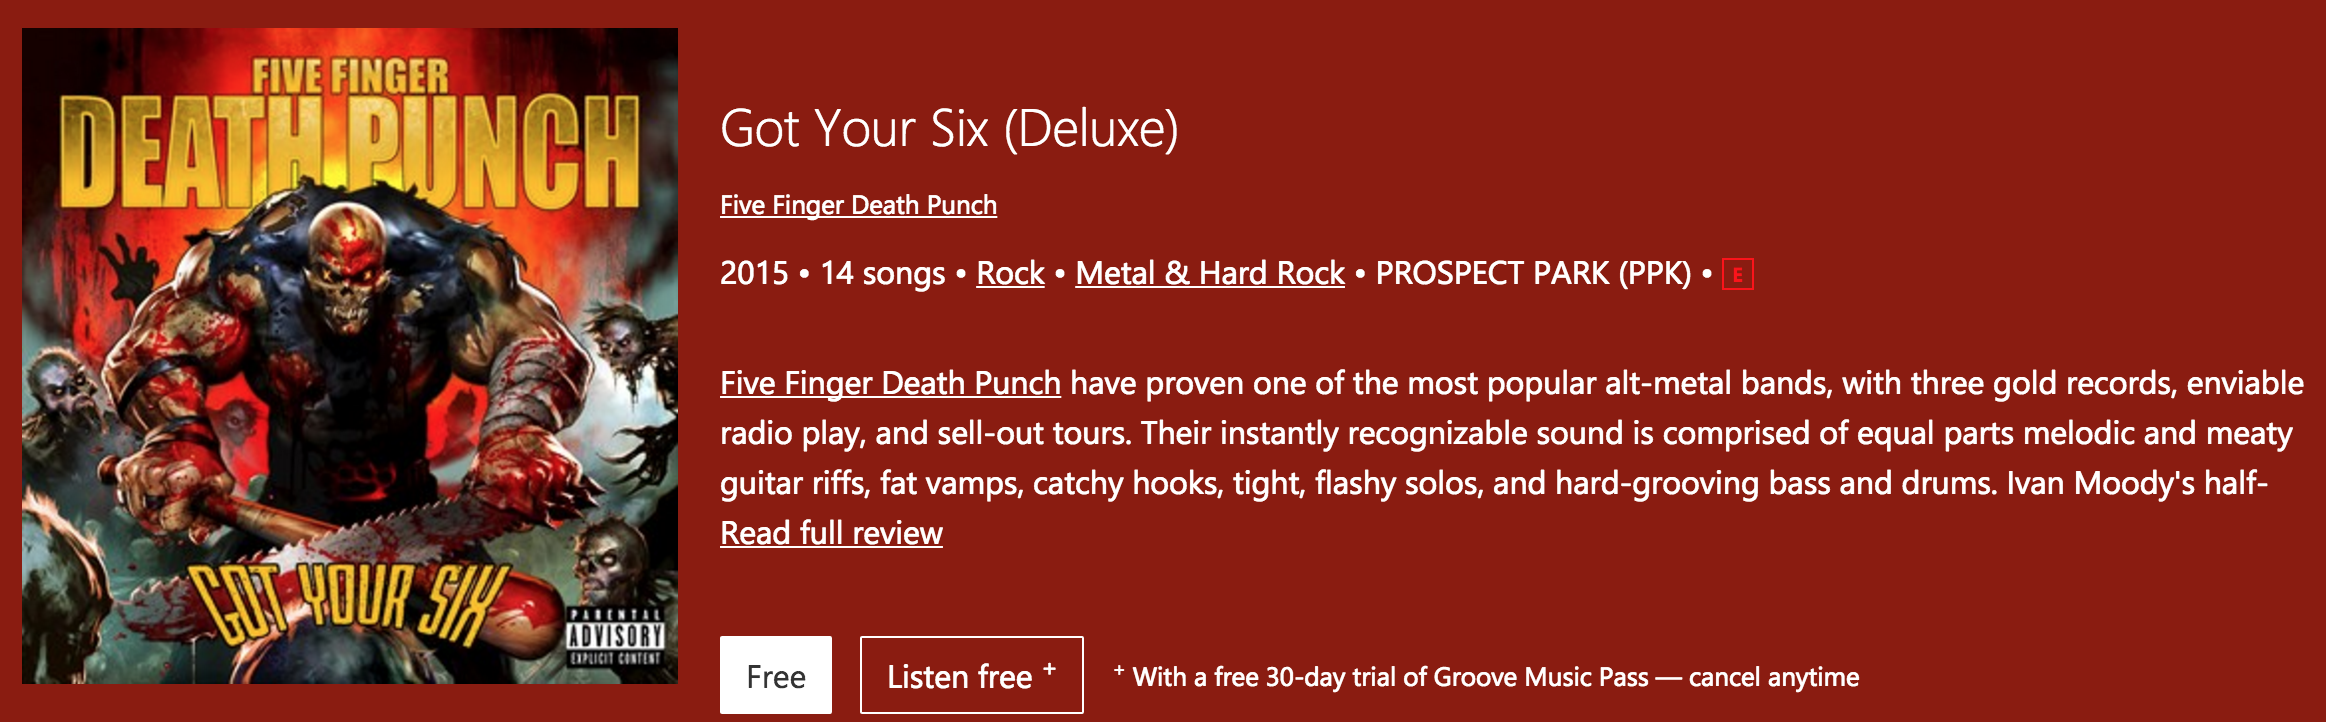 five finger death punch got your six free mp3 download